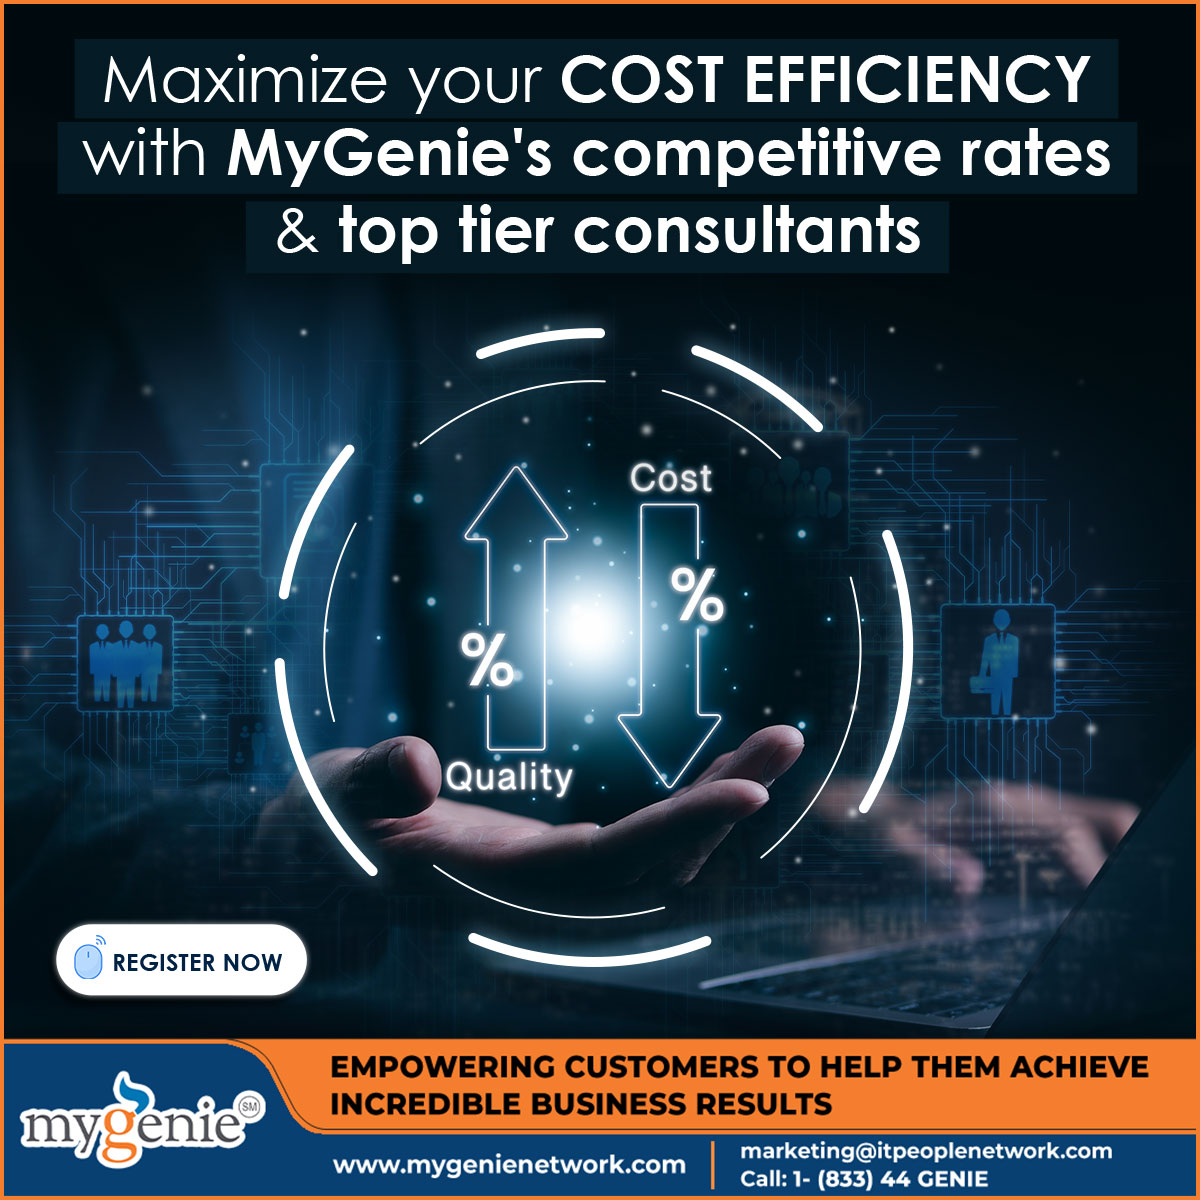 Maximize your cost efficiency using MyGenie!

Register as ‘Employer’ now at MyGenie & procure top IT consultants, best practices, solution accelerators at lowest price: mygenienetwork.com/RegistrationPa…

mygenienetwork.com
#costefficiency #consultants #Procurement #platform  #hiring